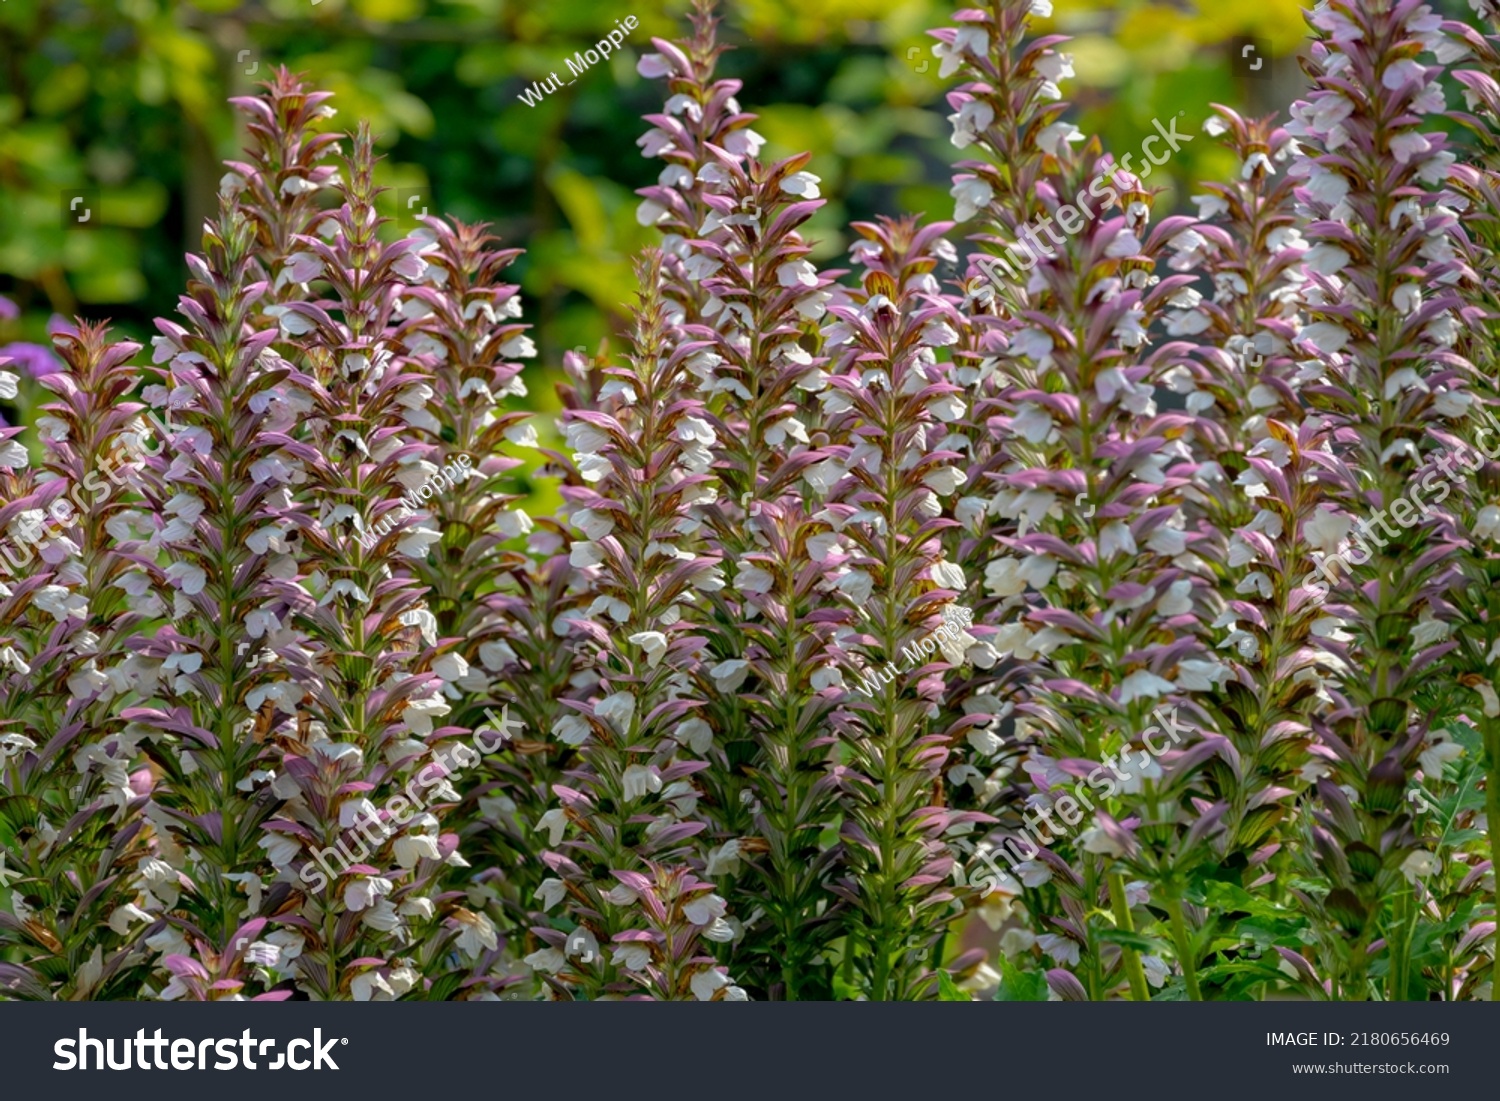 Selective focus of flower Acanthus spinosus in the garden with green leaves, The spiny bear's breech is a species of flowering plant in the family Acanthaceae, Nature floral background. #2180656469